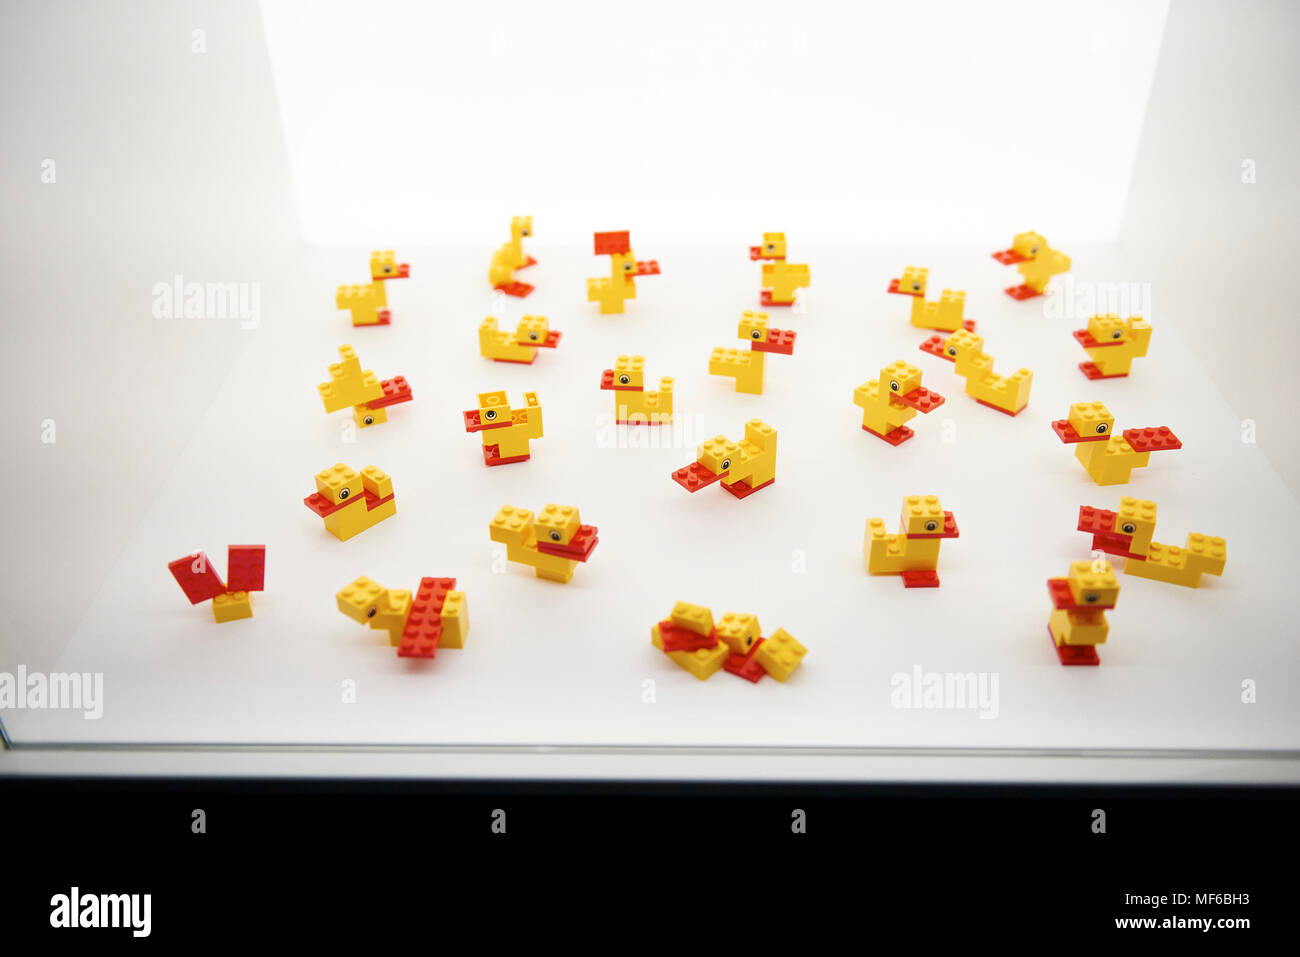 Lego Duck Challenge High Resolution Stock Photography and Images - Alamy